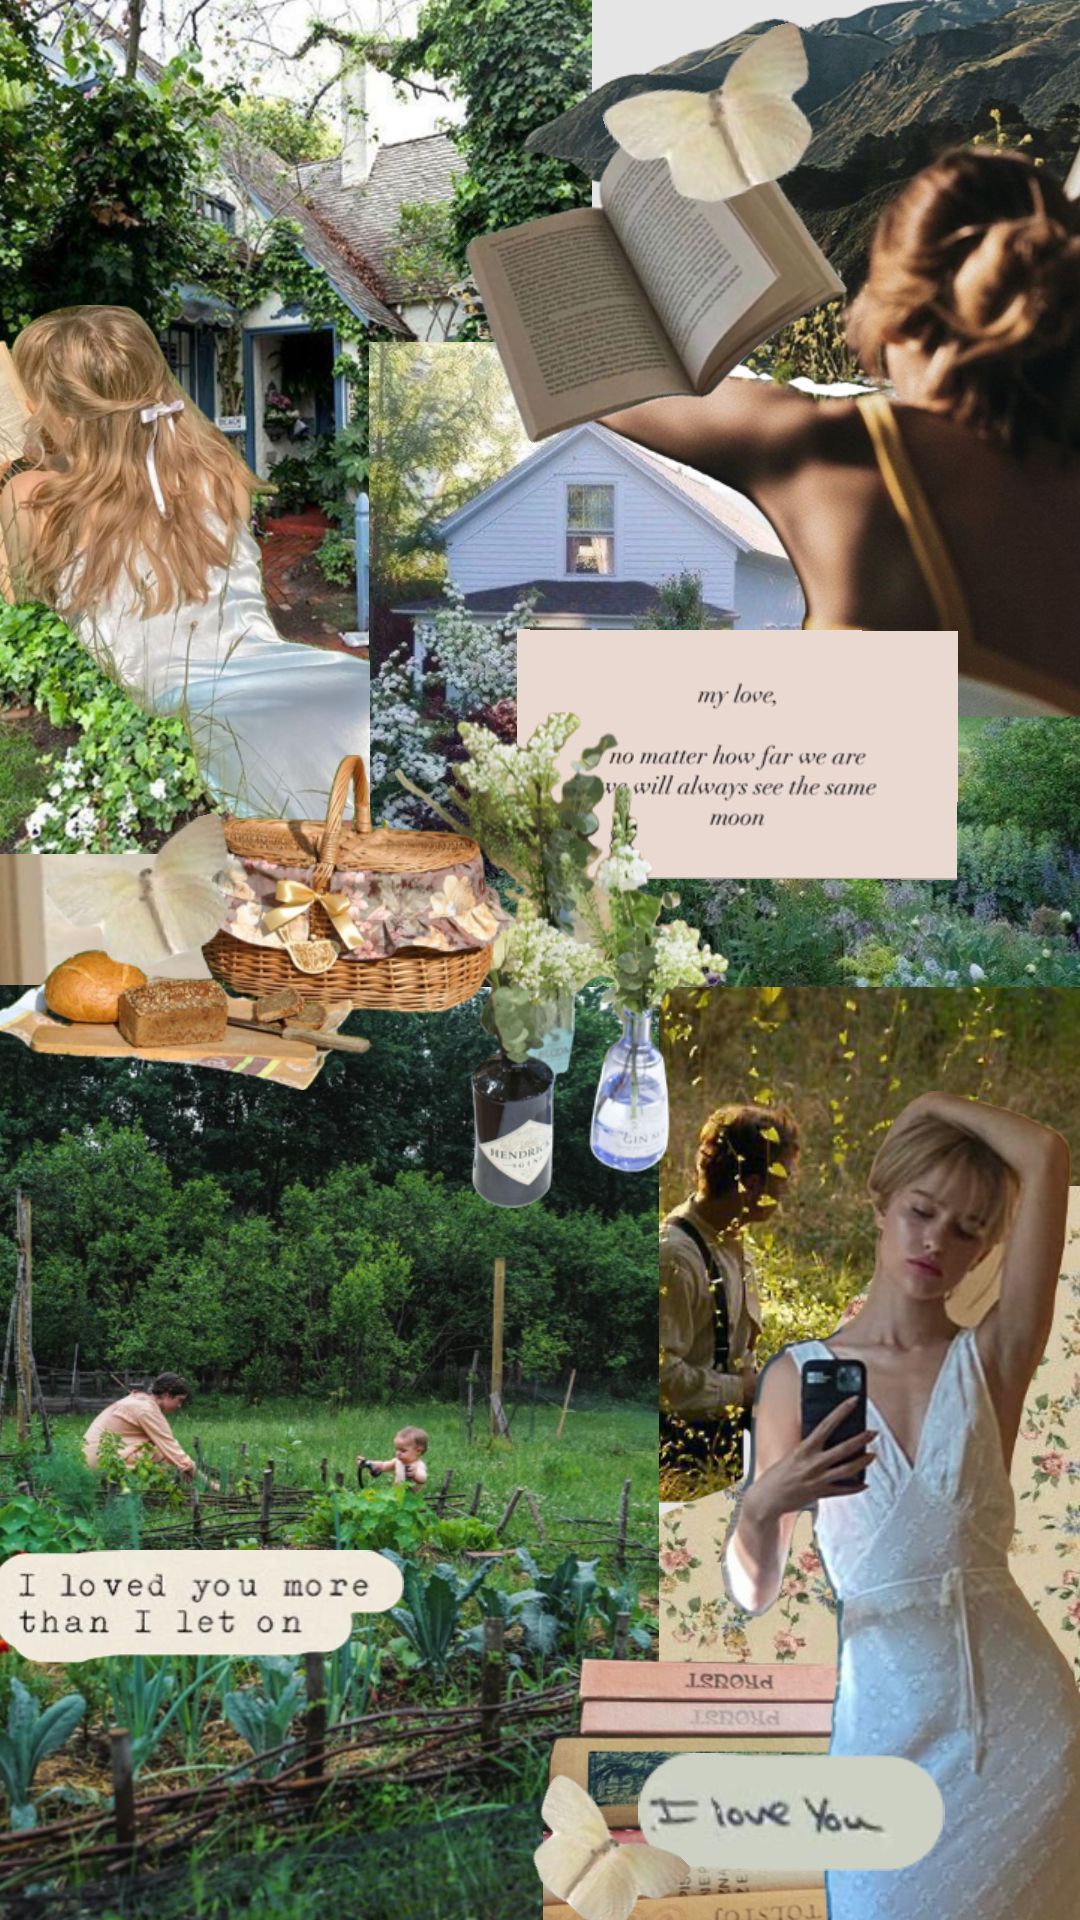 A collage of photos of a girl, flowers, a picnic, and a book. - Cottagecore